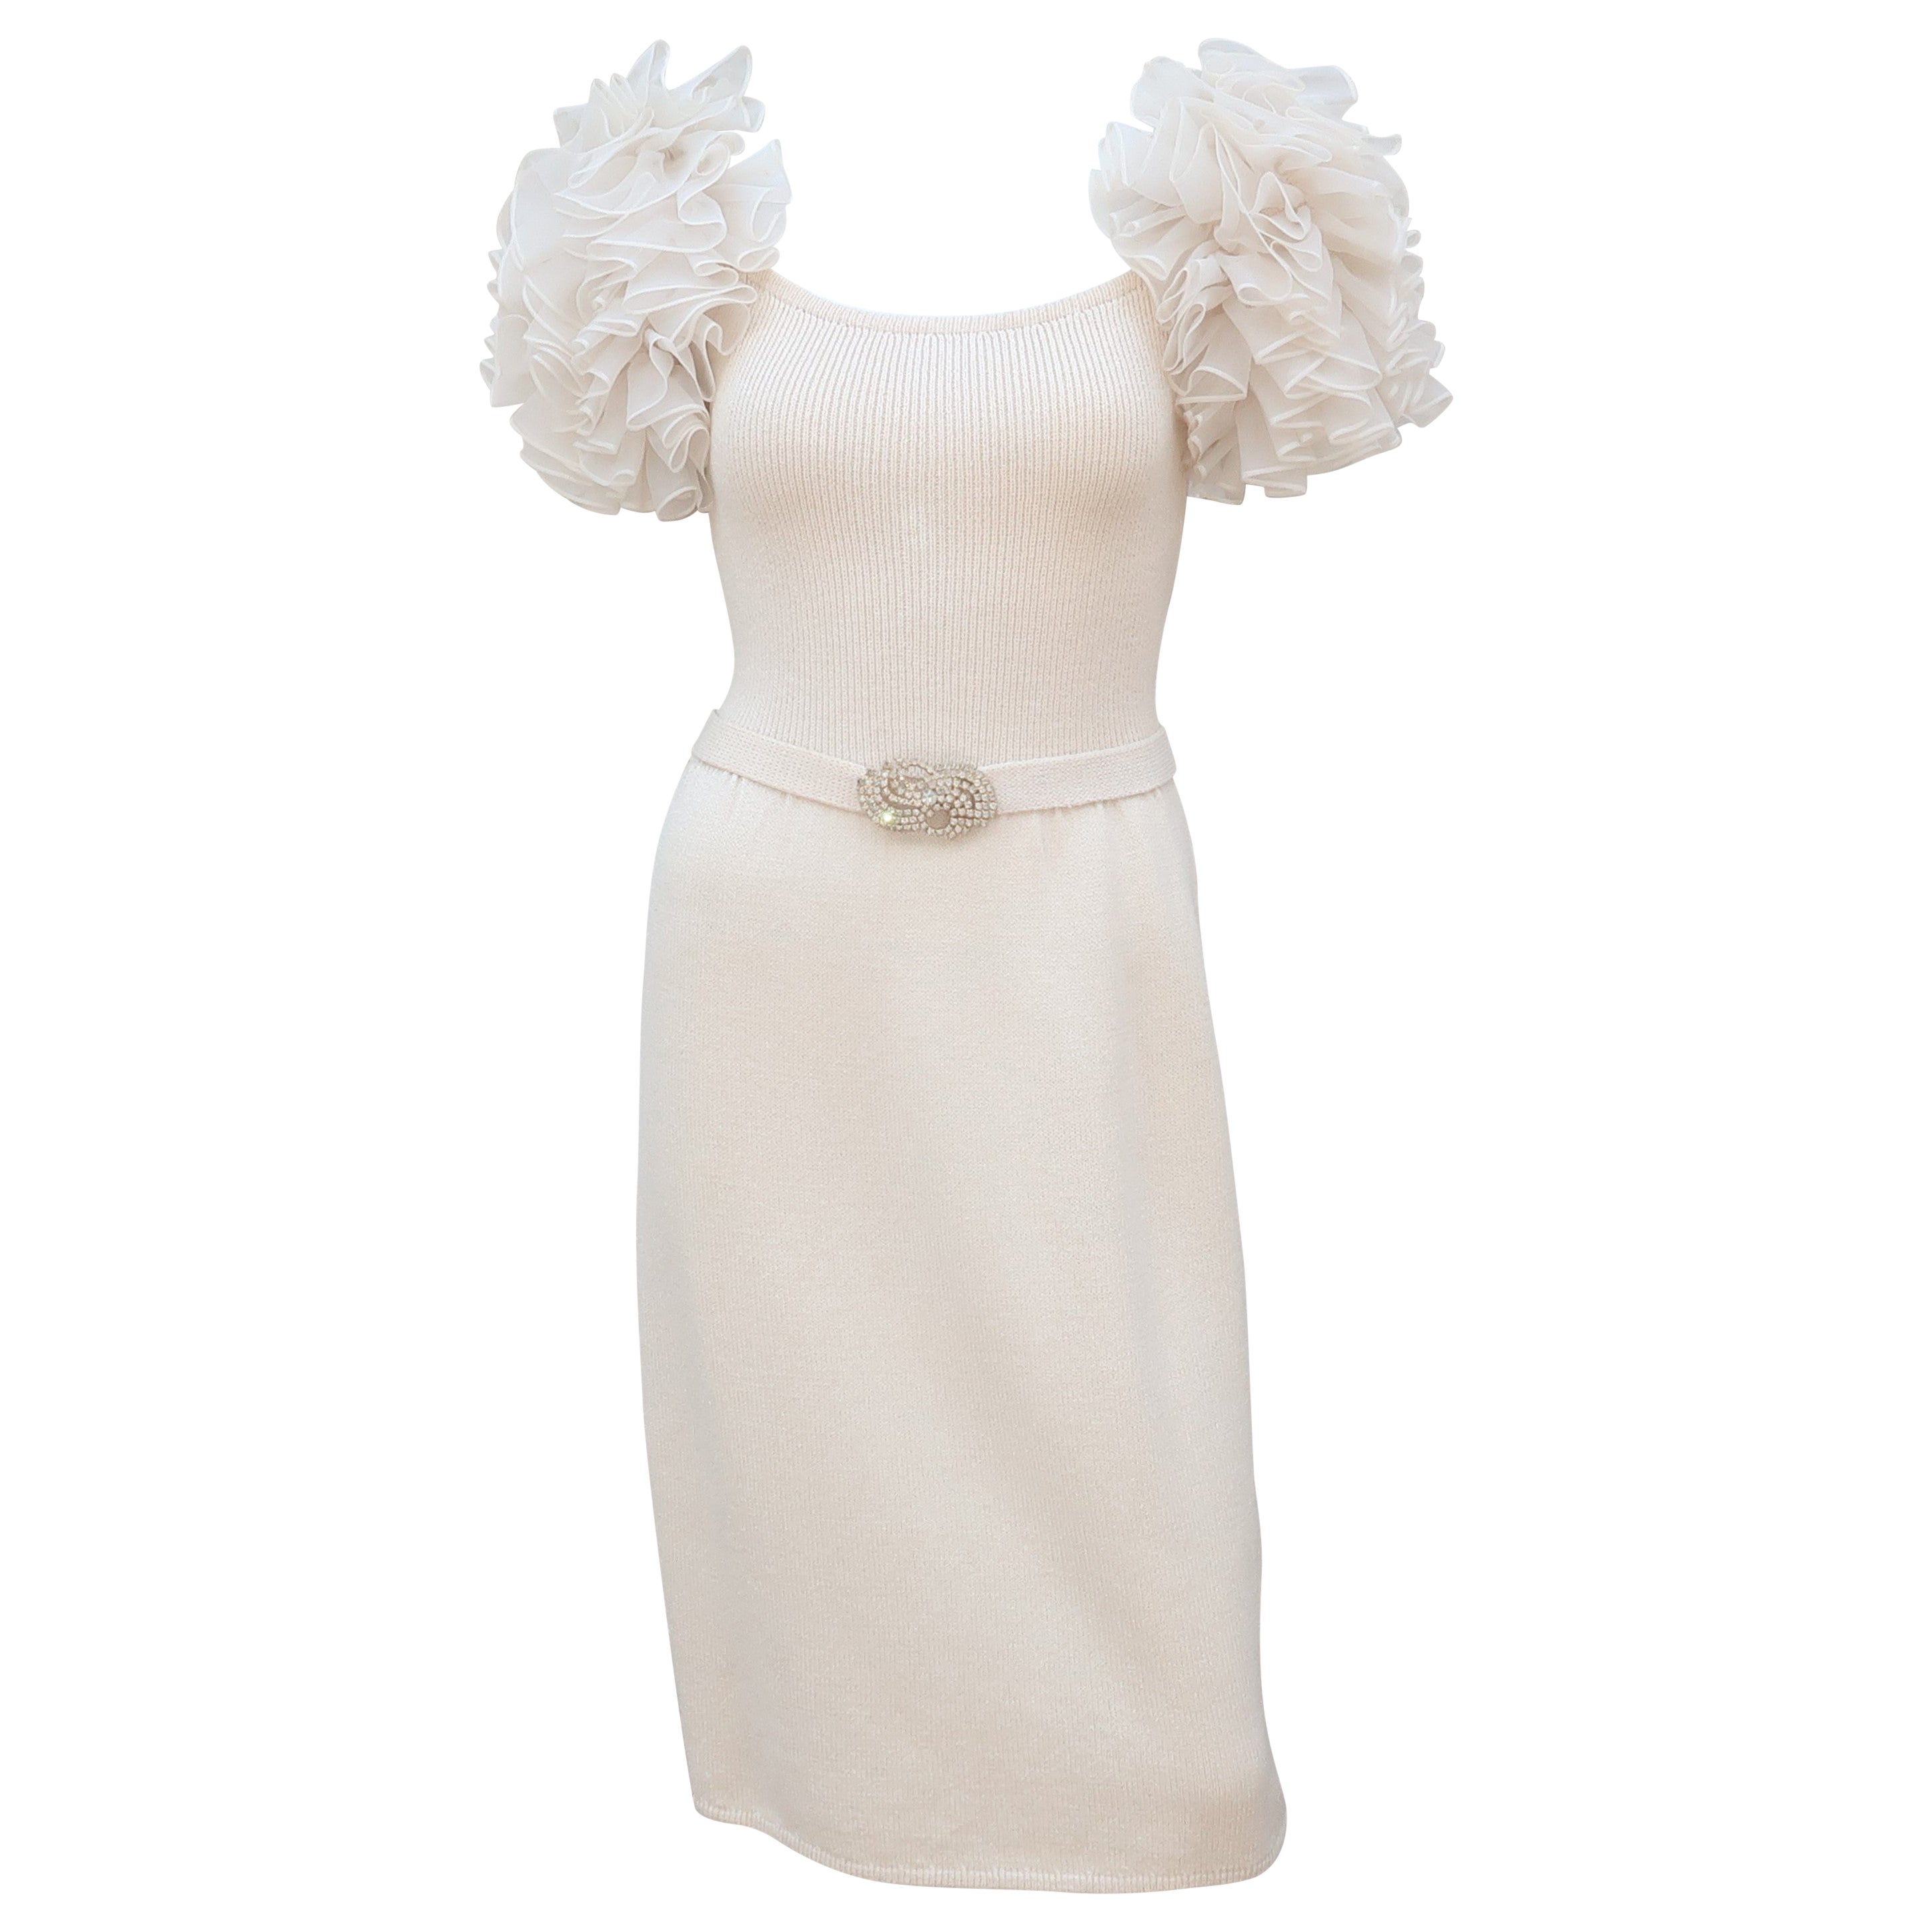 Ivory White Knit Cocktail Dress With Ruffled Sleeves & Rhinestones, C.1980